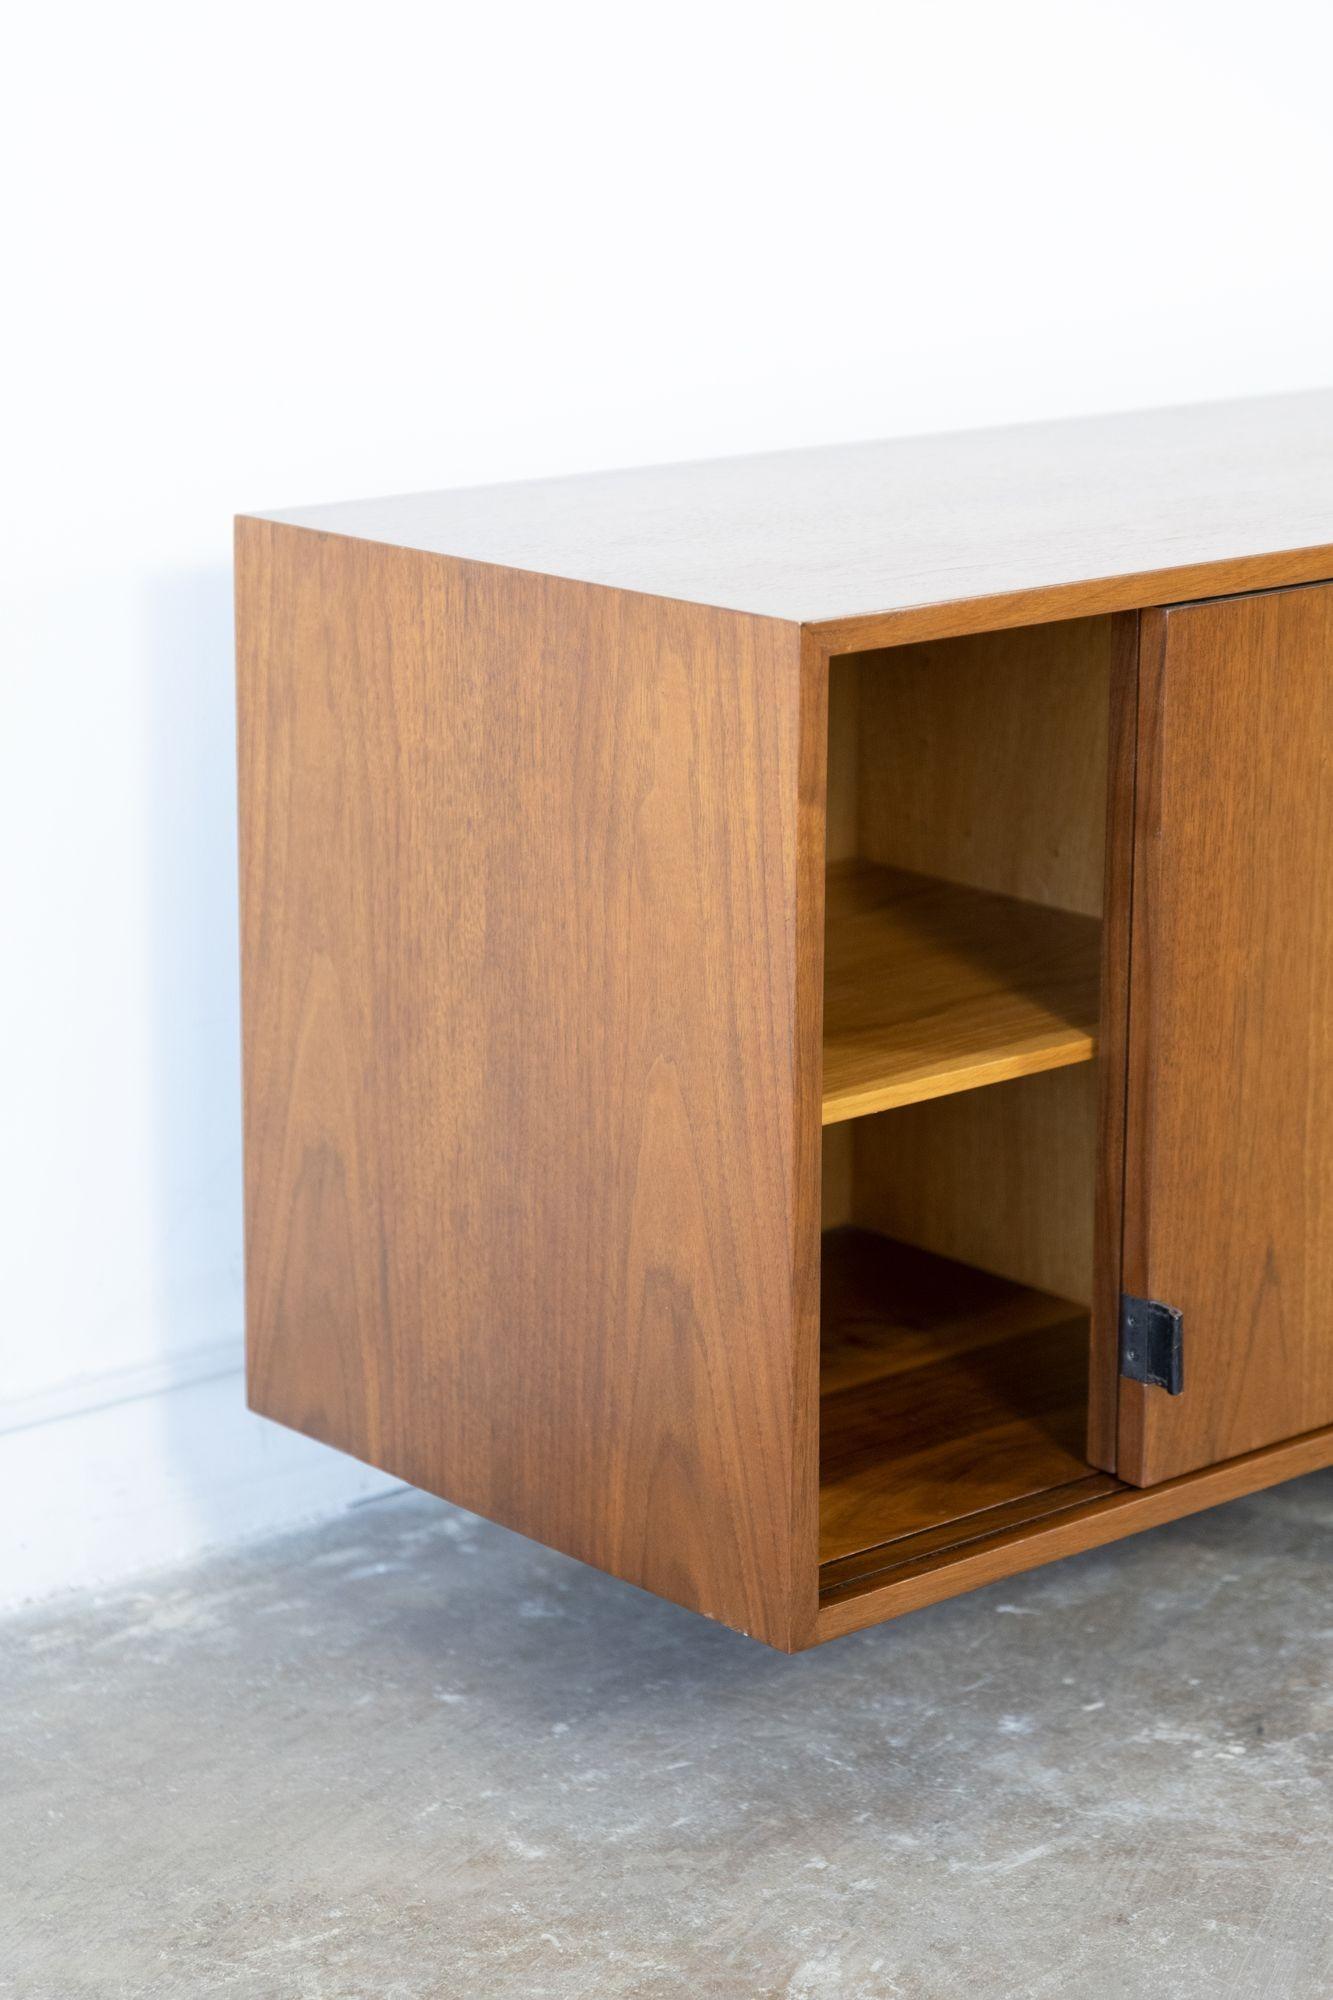 Florence Knoll Wall Mount Cabinet in Walnut with Oak Interior 1960s 1 of 2 3